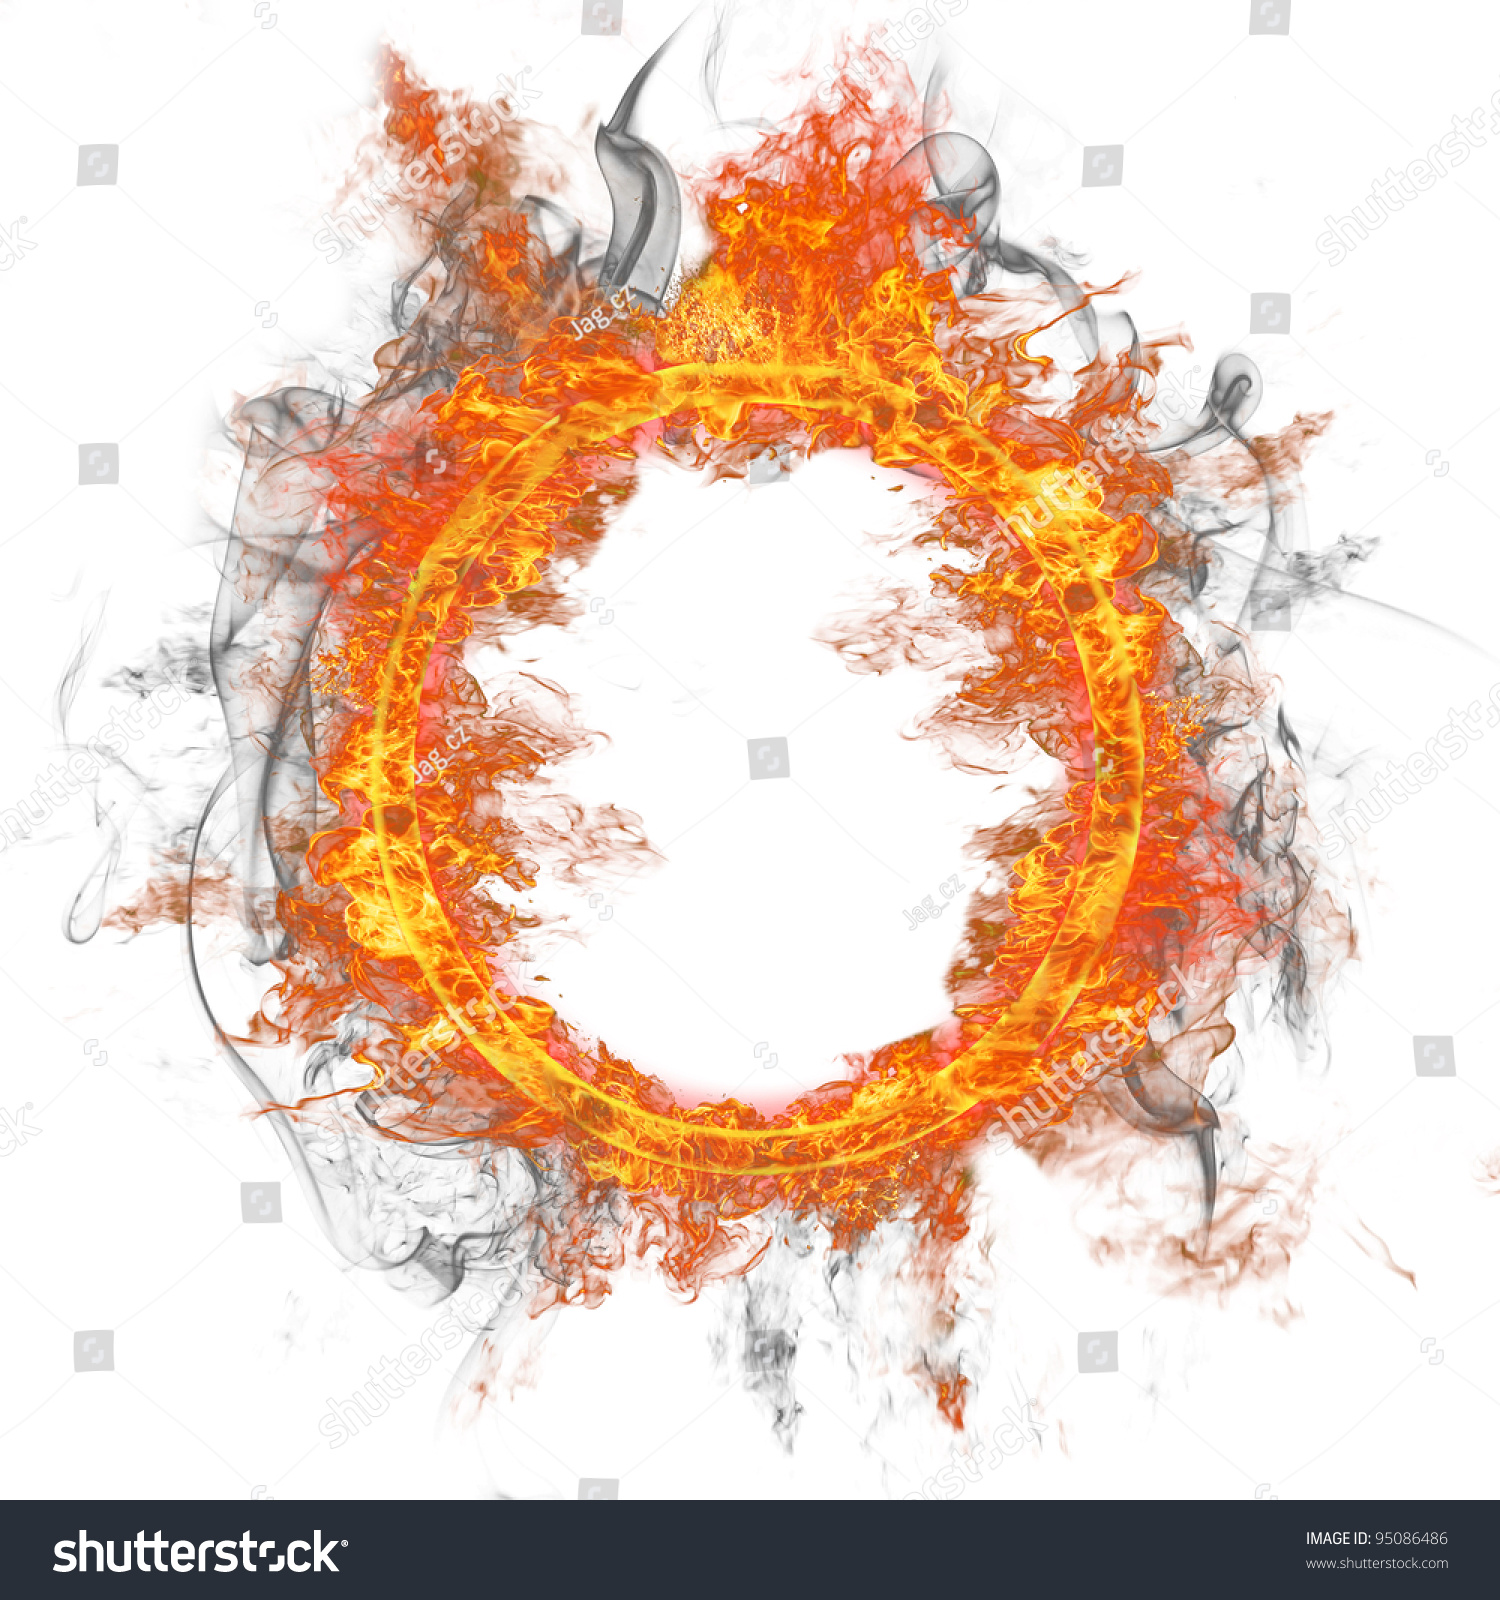 Fire Ring Isolated On White Background Stock Photo